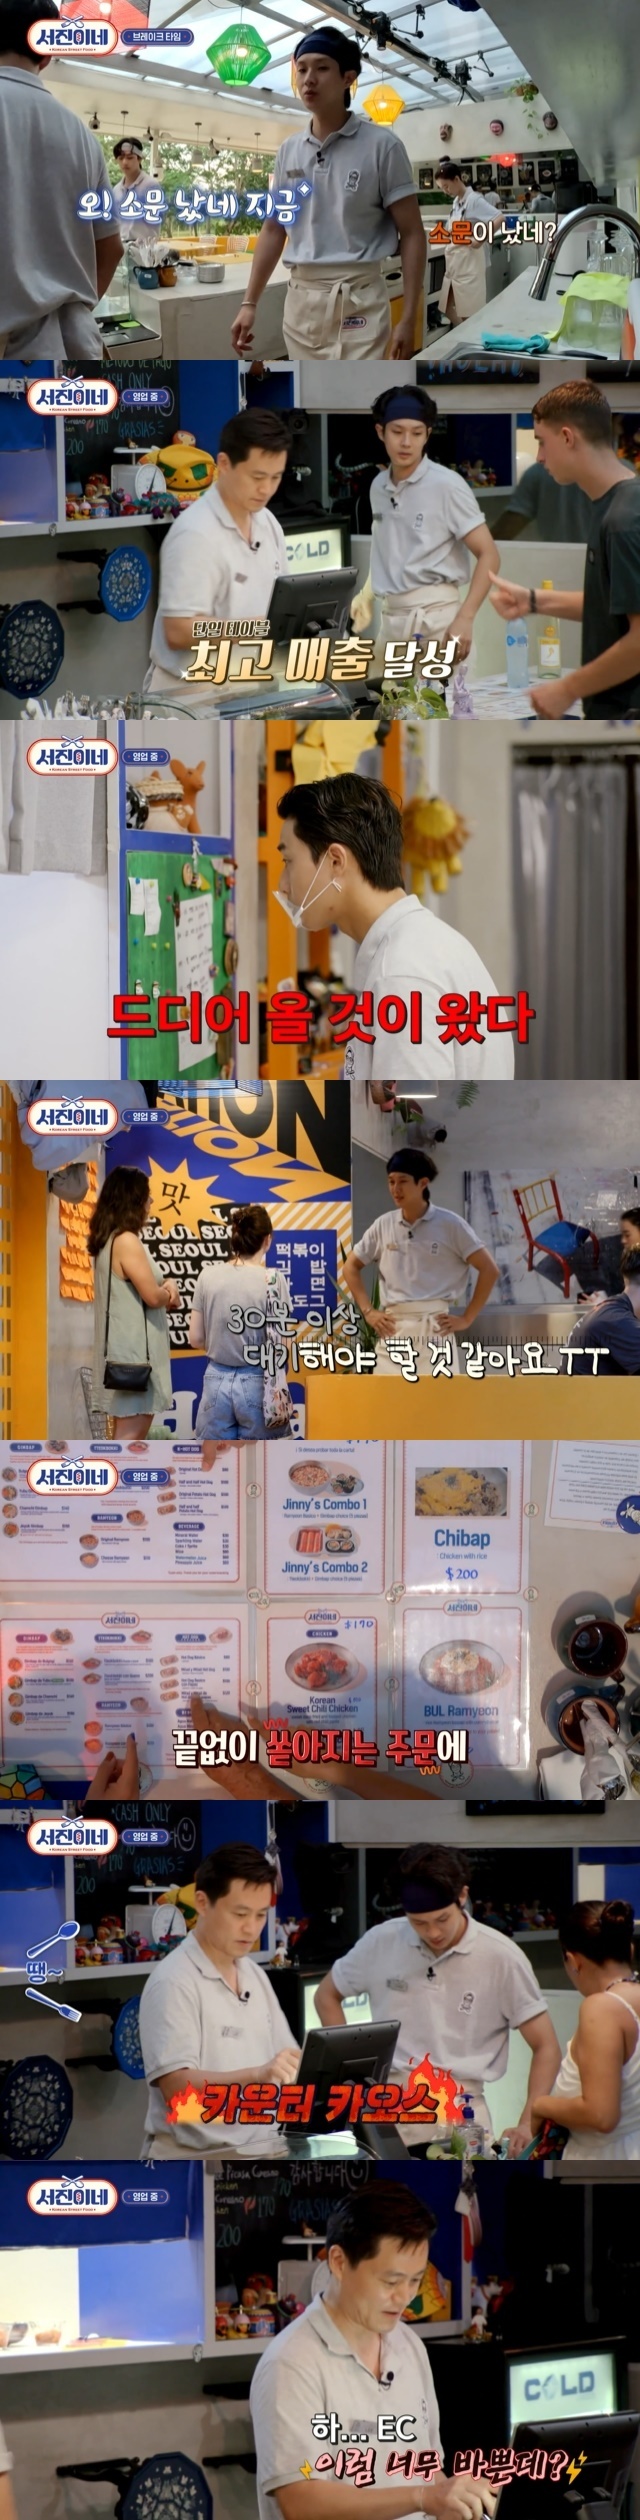 Contagious: Why things catch on.TVN entertainment broadcasted on March 24 Seo-jin! In the 5th session, sales fell sharply after Weekend, and a picture of a cafeteria in crisis was drawn.On Sunday, Haru rested and on Monday business day, Lee Seo-jin eventually closed the store when there were no customers passing through the street where the sales amounted to about 300,000 won, which is less than half of the previous day.As soon as Park Seo-joon heard the closing news, he looked at the chicken and fries that were not sold, saying, Its piled up here this evening. Lee Seo-jin hurriedly picked up the remaining food such as tteokbokki.As soon as Park Seo-joon returned to the hostel, he proceeded to develop the menu first of all.Park Seo-joon made seasoned chibab and cup-style soy sauce chibab using Chicken spice.Employees who tasted these two Chicken almost unanimously commented that the taste of soy sauce was better, and soy sauce chibab was immediately adopted as a new menu.The next day, the two interns went to the market to see the market. First, while ordering 4kg of chicken for Chicken, Choi Woo-shik said, Would you like to buy clothes while Im buying here?As soon as I arrived at the market, I suggested to Vu who showed interest in clothes. I went to the clothing store and chose clothes suitable for Choi Woo-shik and Lee Seo-jin as well as my clothes.Lee Seo-jin, who was at the hotel at that time, heard a real-time report from Na Young-seok PD, Im picking clothes in the kids market. He said, I can not believe it.I called Choi Woo-shik to confirm the rumor, but it was not connected well, and Lee Seo-jin was dissatisfied with saying, The caries should be in my sight. Lee Seo-jin said, Yumi is not going to be able to go up anymore in the executive director. It is hard to get any further promotion. I have to retire from the executive director. The advantage is meticulous, creative mind.There are too many other things to think about. I have to ride a bicycle and I do not have too much loyalty. I score 7.5-8 out of 10. On the other hand, Park Seo-joon was selected as the successor. Park is the one who will go on. Seo-jin! Lee Seo-jin said, I am good at cooking,If you pass it on, who else is there but Seo Jun? He is almost 9.5. Choi Woo-shik has an affinity for getting to know people quickly. Hes right to serve. Hes quick-witted. Hes a good person to deal with, Choi Woo-shik said.But when it came time to talk about his shortcomings, he sighed and said, Its a lot. I keep trying to hide somewhere. I have to look away. I have to be in front of my eyes unconditionally. Im nervous if Im not in front of my eyes.Lastly, the order of V. Lee Seo-jin gave a scathing criticism, saying, He seems to be working hard to keep silent. He is sincere. His shortcomings have slowed down. Its frustrating. Haru, Ill cut only the slices all day. Hes similar, too. About seven points.On the other hand, Lee Seo-jin did not have much expectation for sales because it was a Wednesday when many shops in Bacalar were closed, which means that there are no customers on the street.When the actual store was opened and there was no guest for a while, the employees voluntarily looked at Lee Seo-jins eyes, but after a while the guests started to gather.At Brake time, some customers made reservations, saying, People told me this place was good.After Brake Time, guests entered in succession and proved the popularity of famous restaurants.In particular, the reservation customers ordered the largest number of single tables, and Park Seo-joon and V responded, Its here and Whats this? The two people thoroughly divided their work and cleared the menu one by one.However, soon after the largest group of guests came in, there was a guest of weighting.Whenever Park Seo-joon and V looked at the order book, they were embarrassed, saying, There are more people than Weekend and I thought this was the hardest thing in my life. Lee Seo-jin was also embarrassed to say, This is too busy.